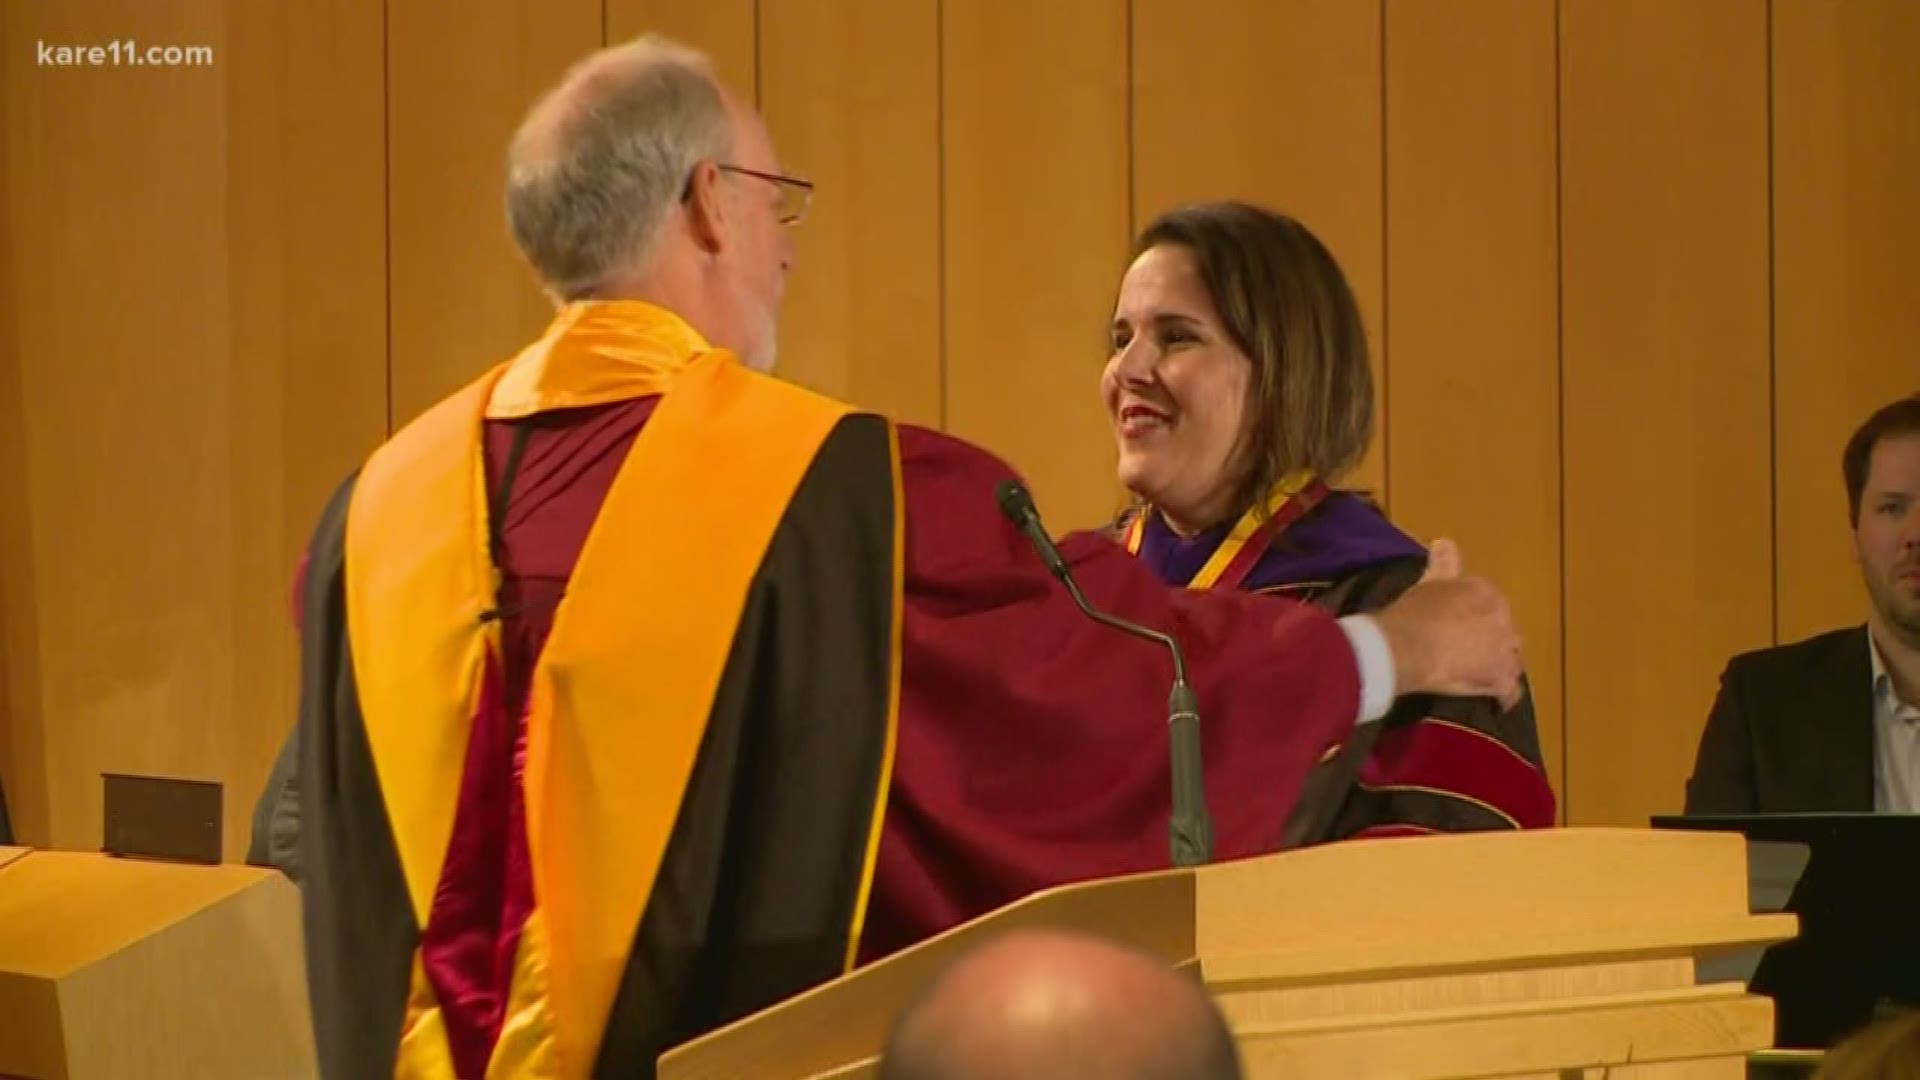 An inauguration ceremony was held for the University of Minnesota's new president at University Hall on Friday.